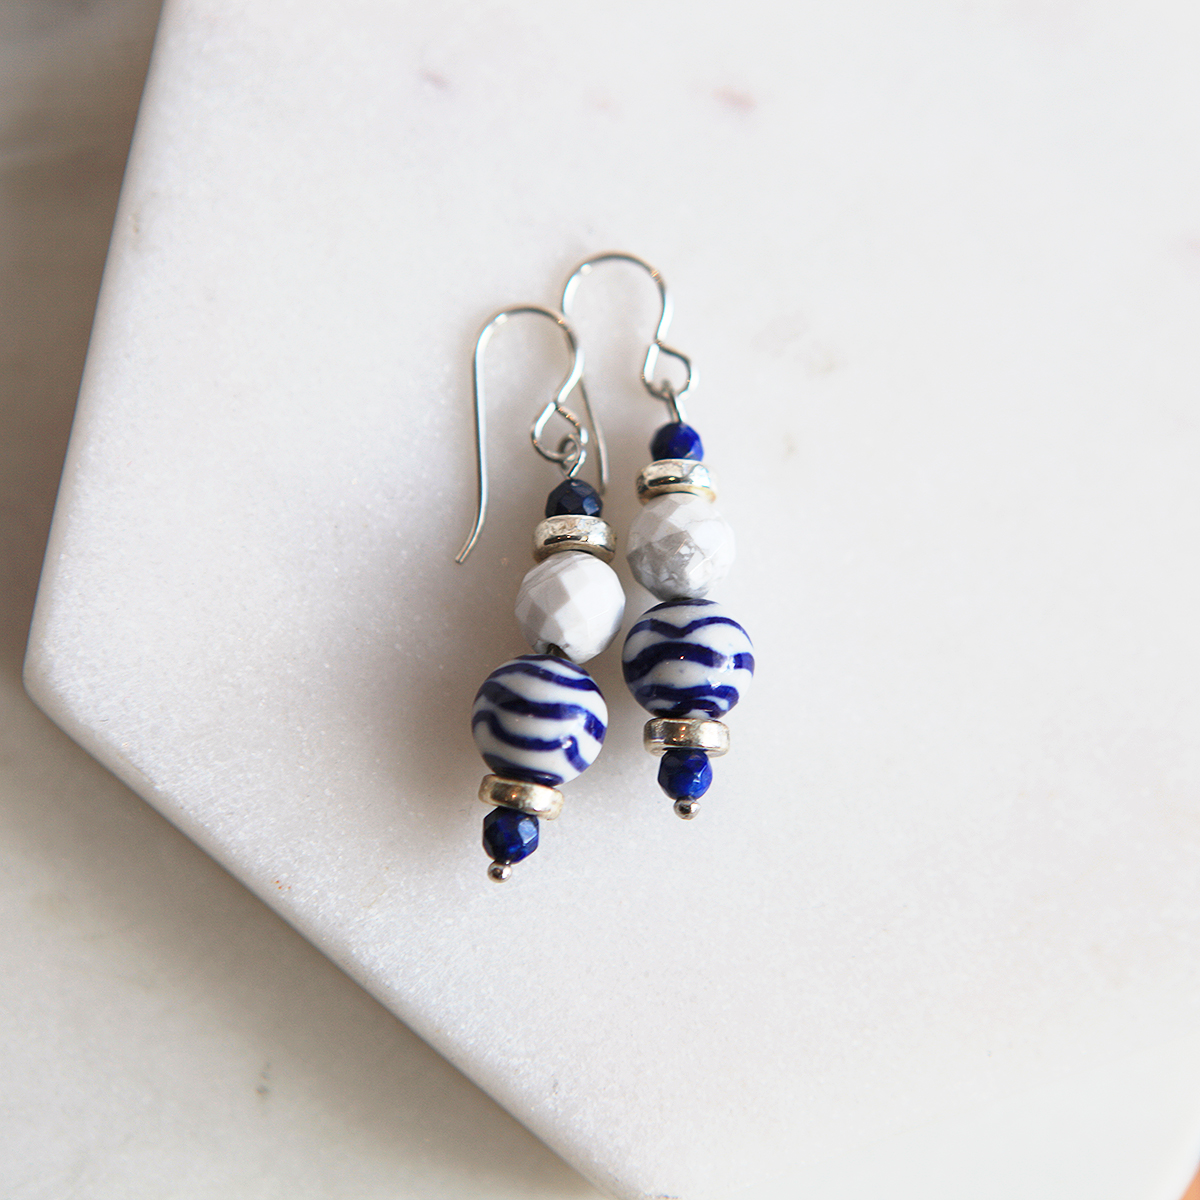 Gemline Earrings Blue Silver Ceramic Howlite And Lapis Colourful And